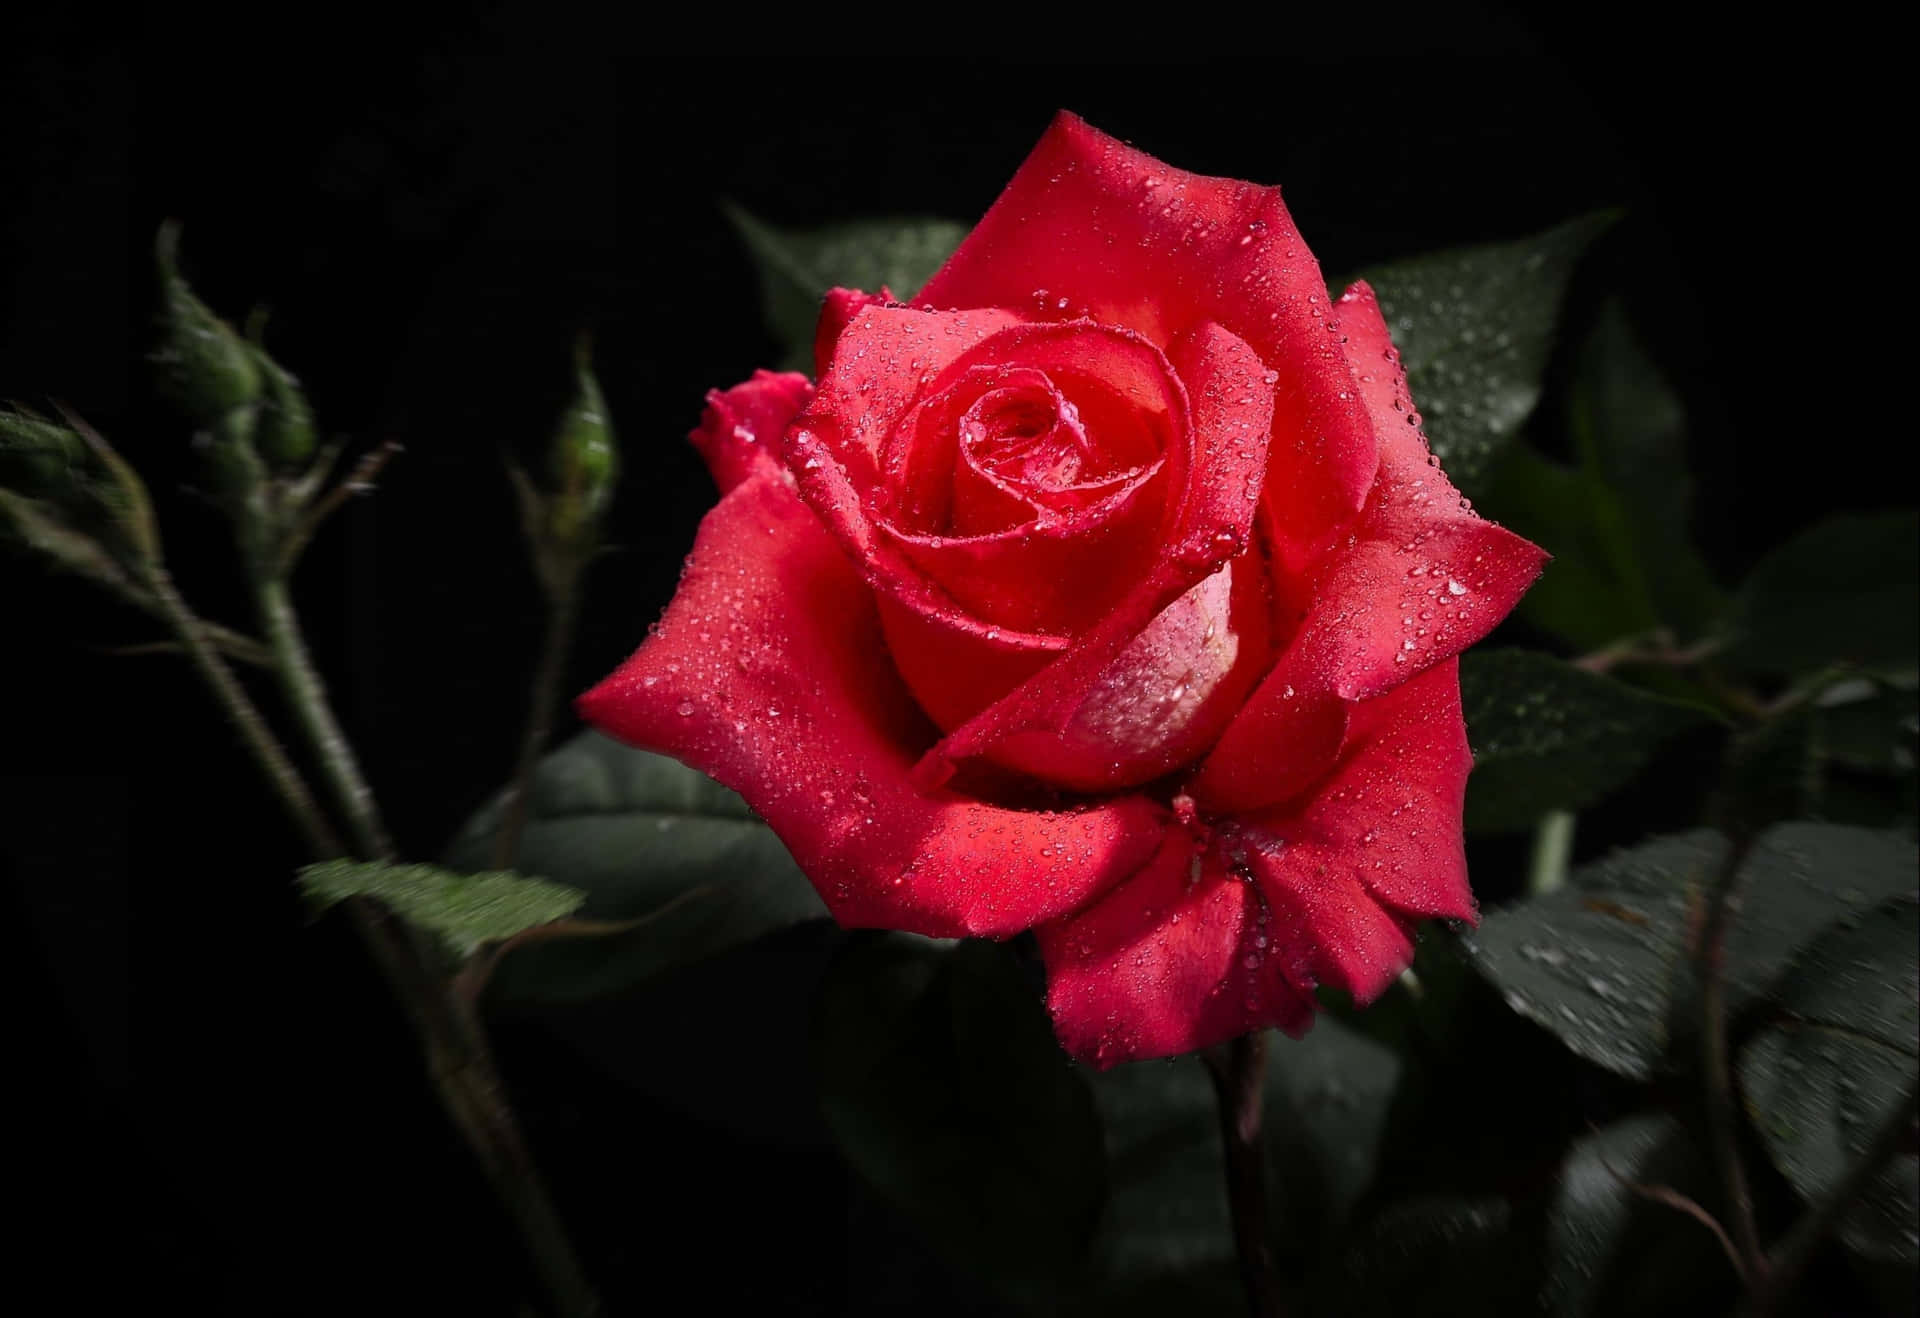 Hd Rose With Dew Drops